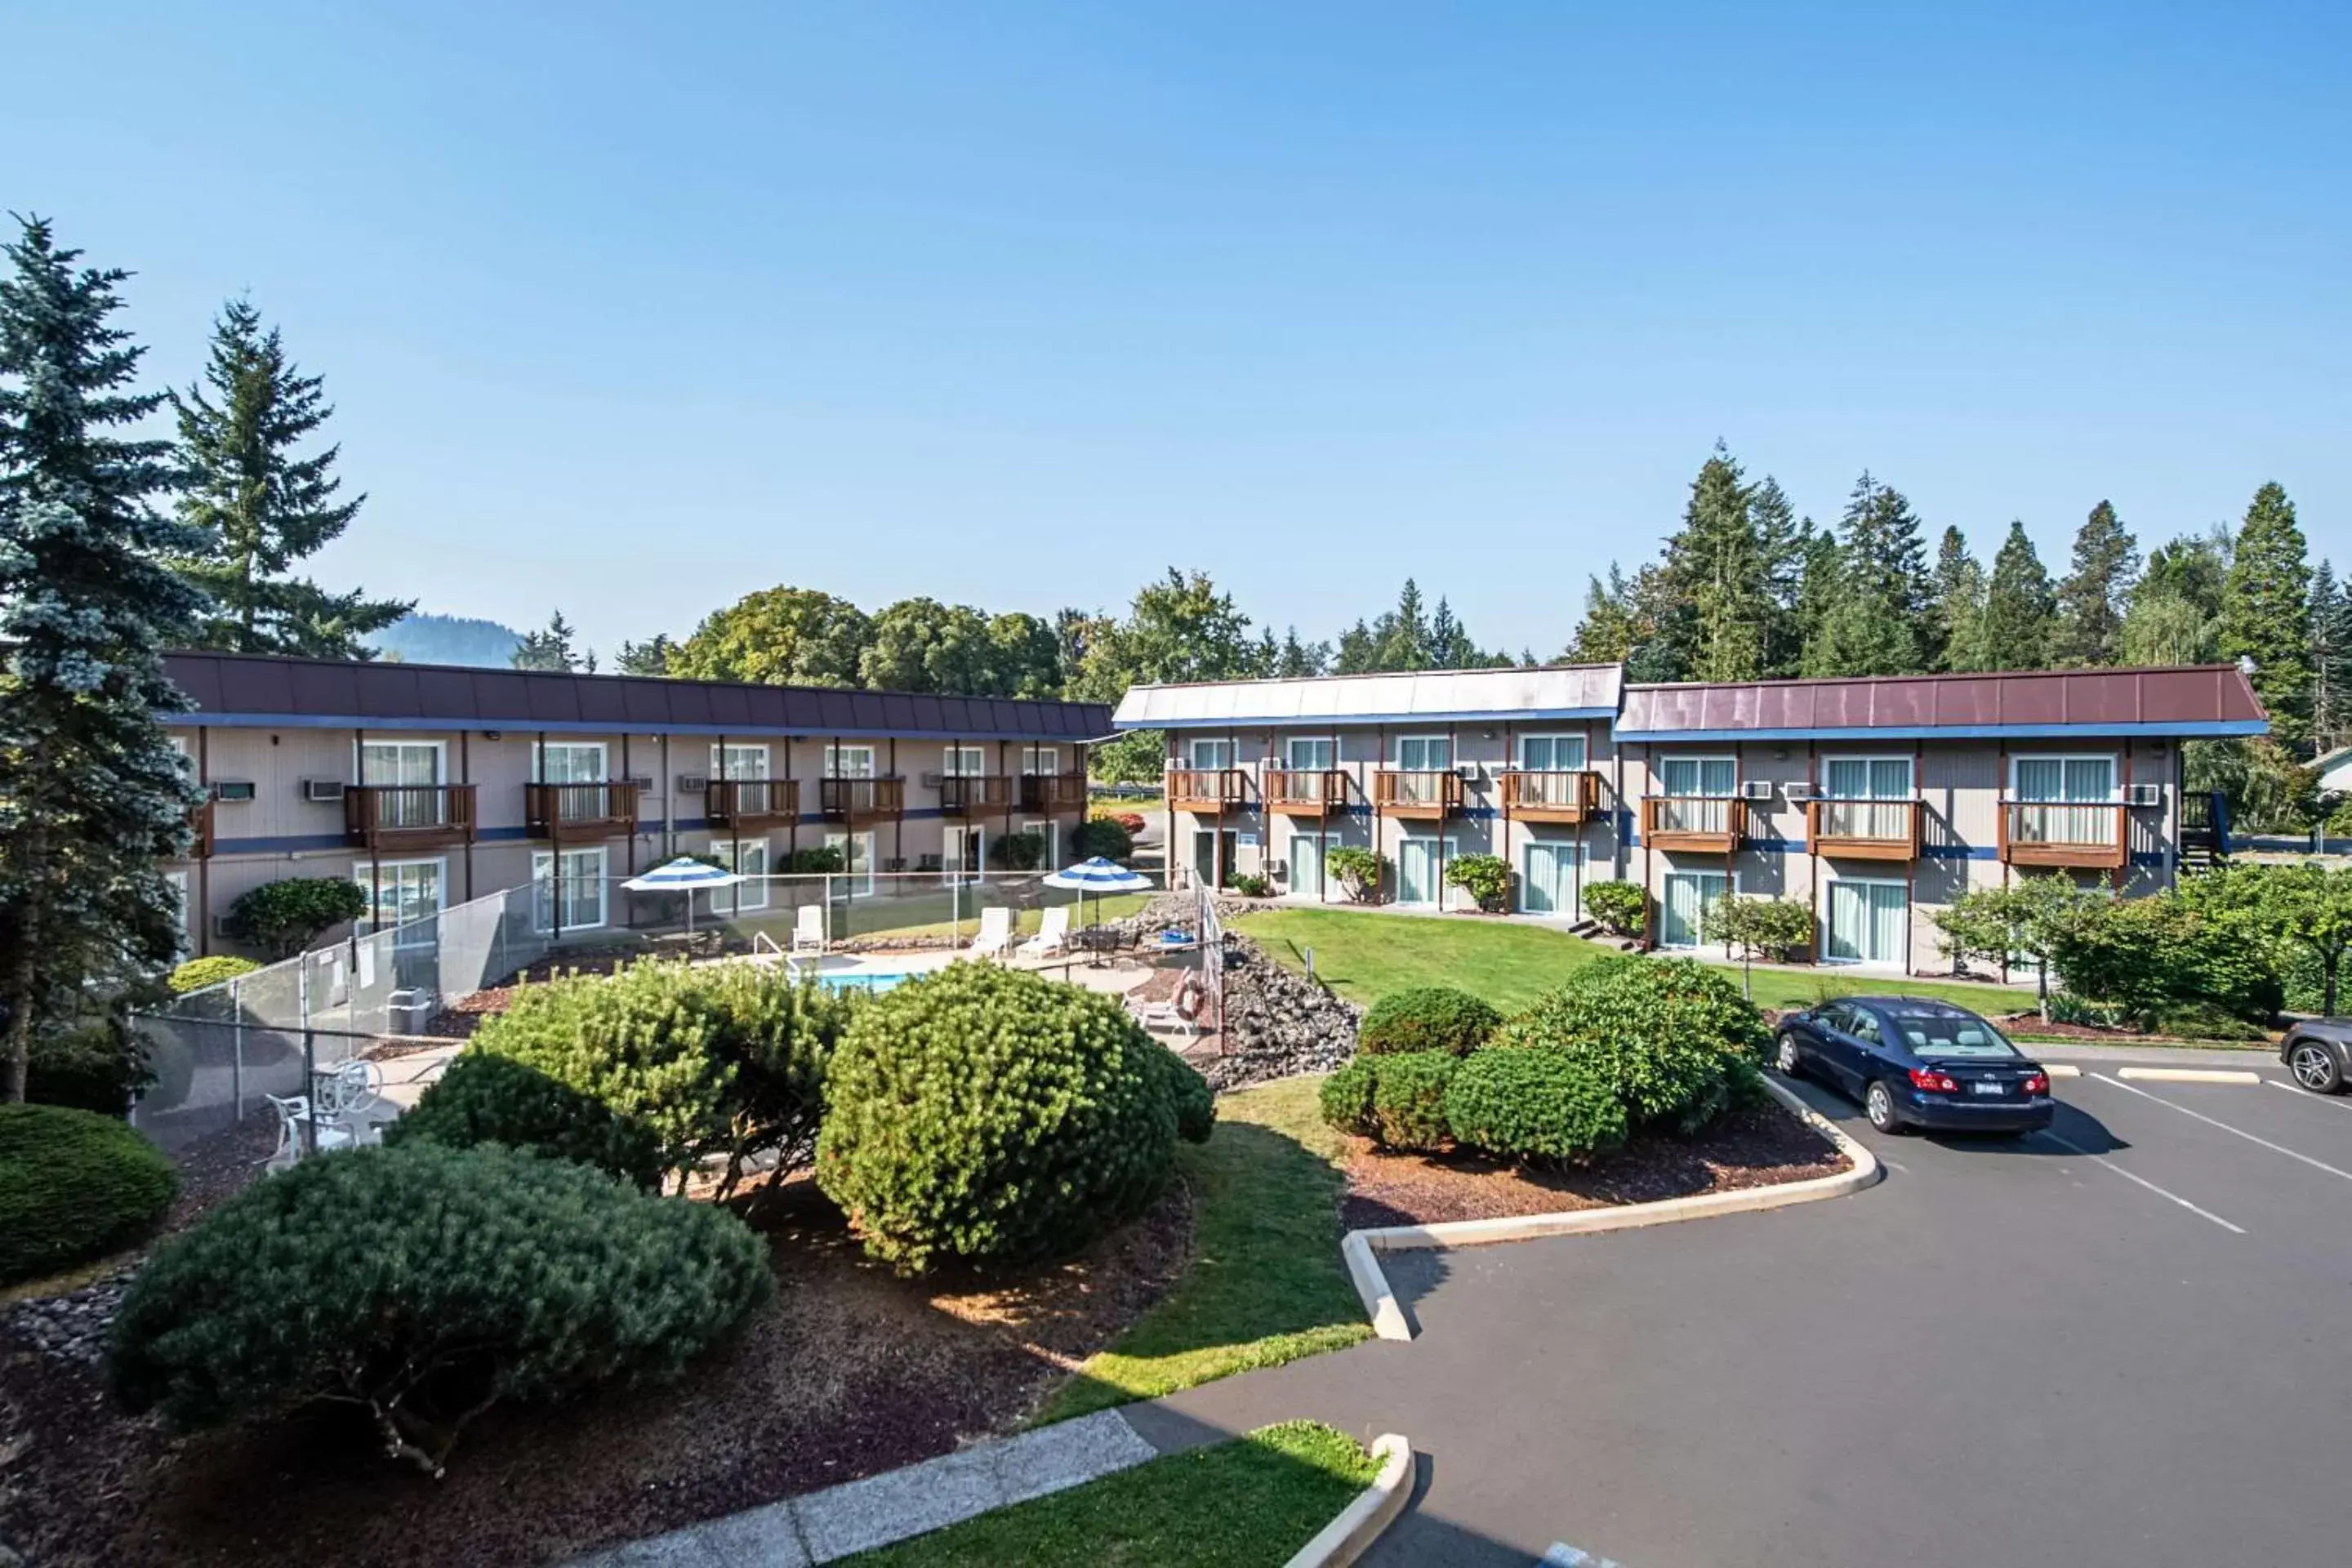 Property Building in Rodeway Inn Enumclaw Mount Rainer-Crystal Mountain Area